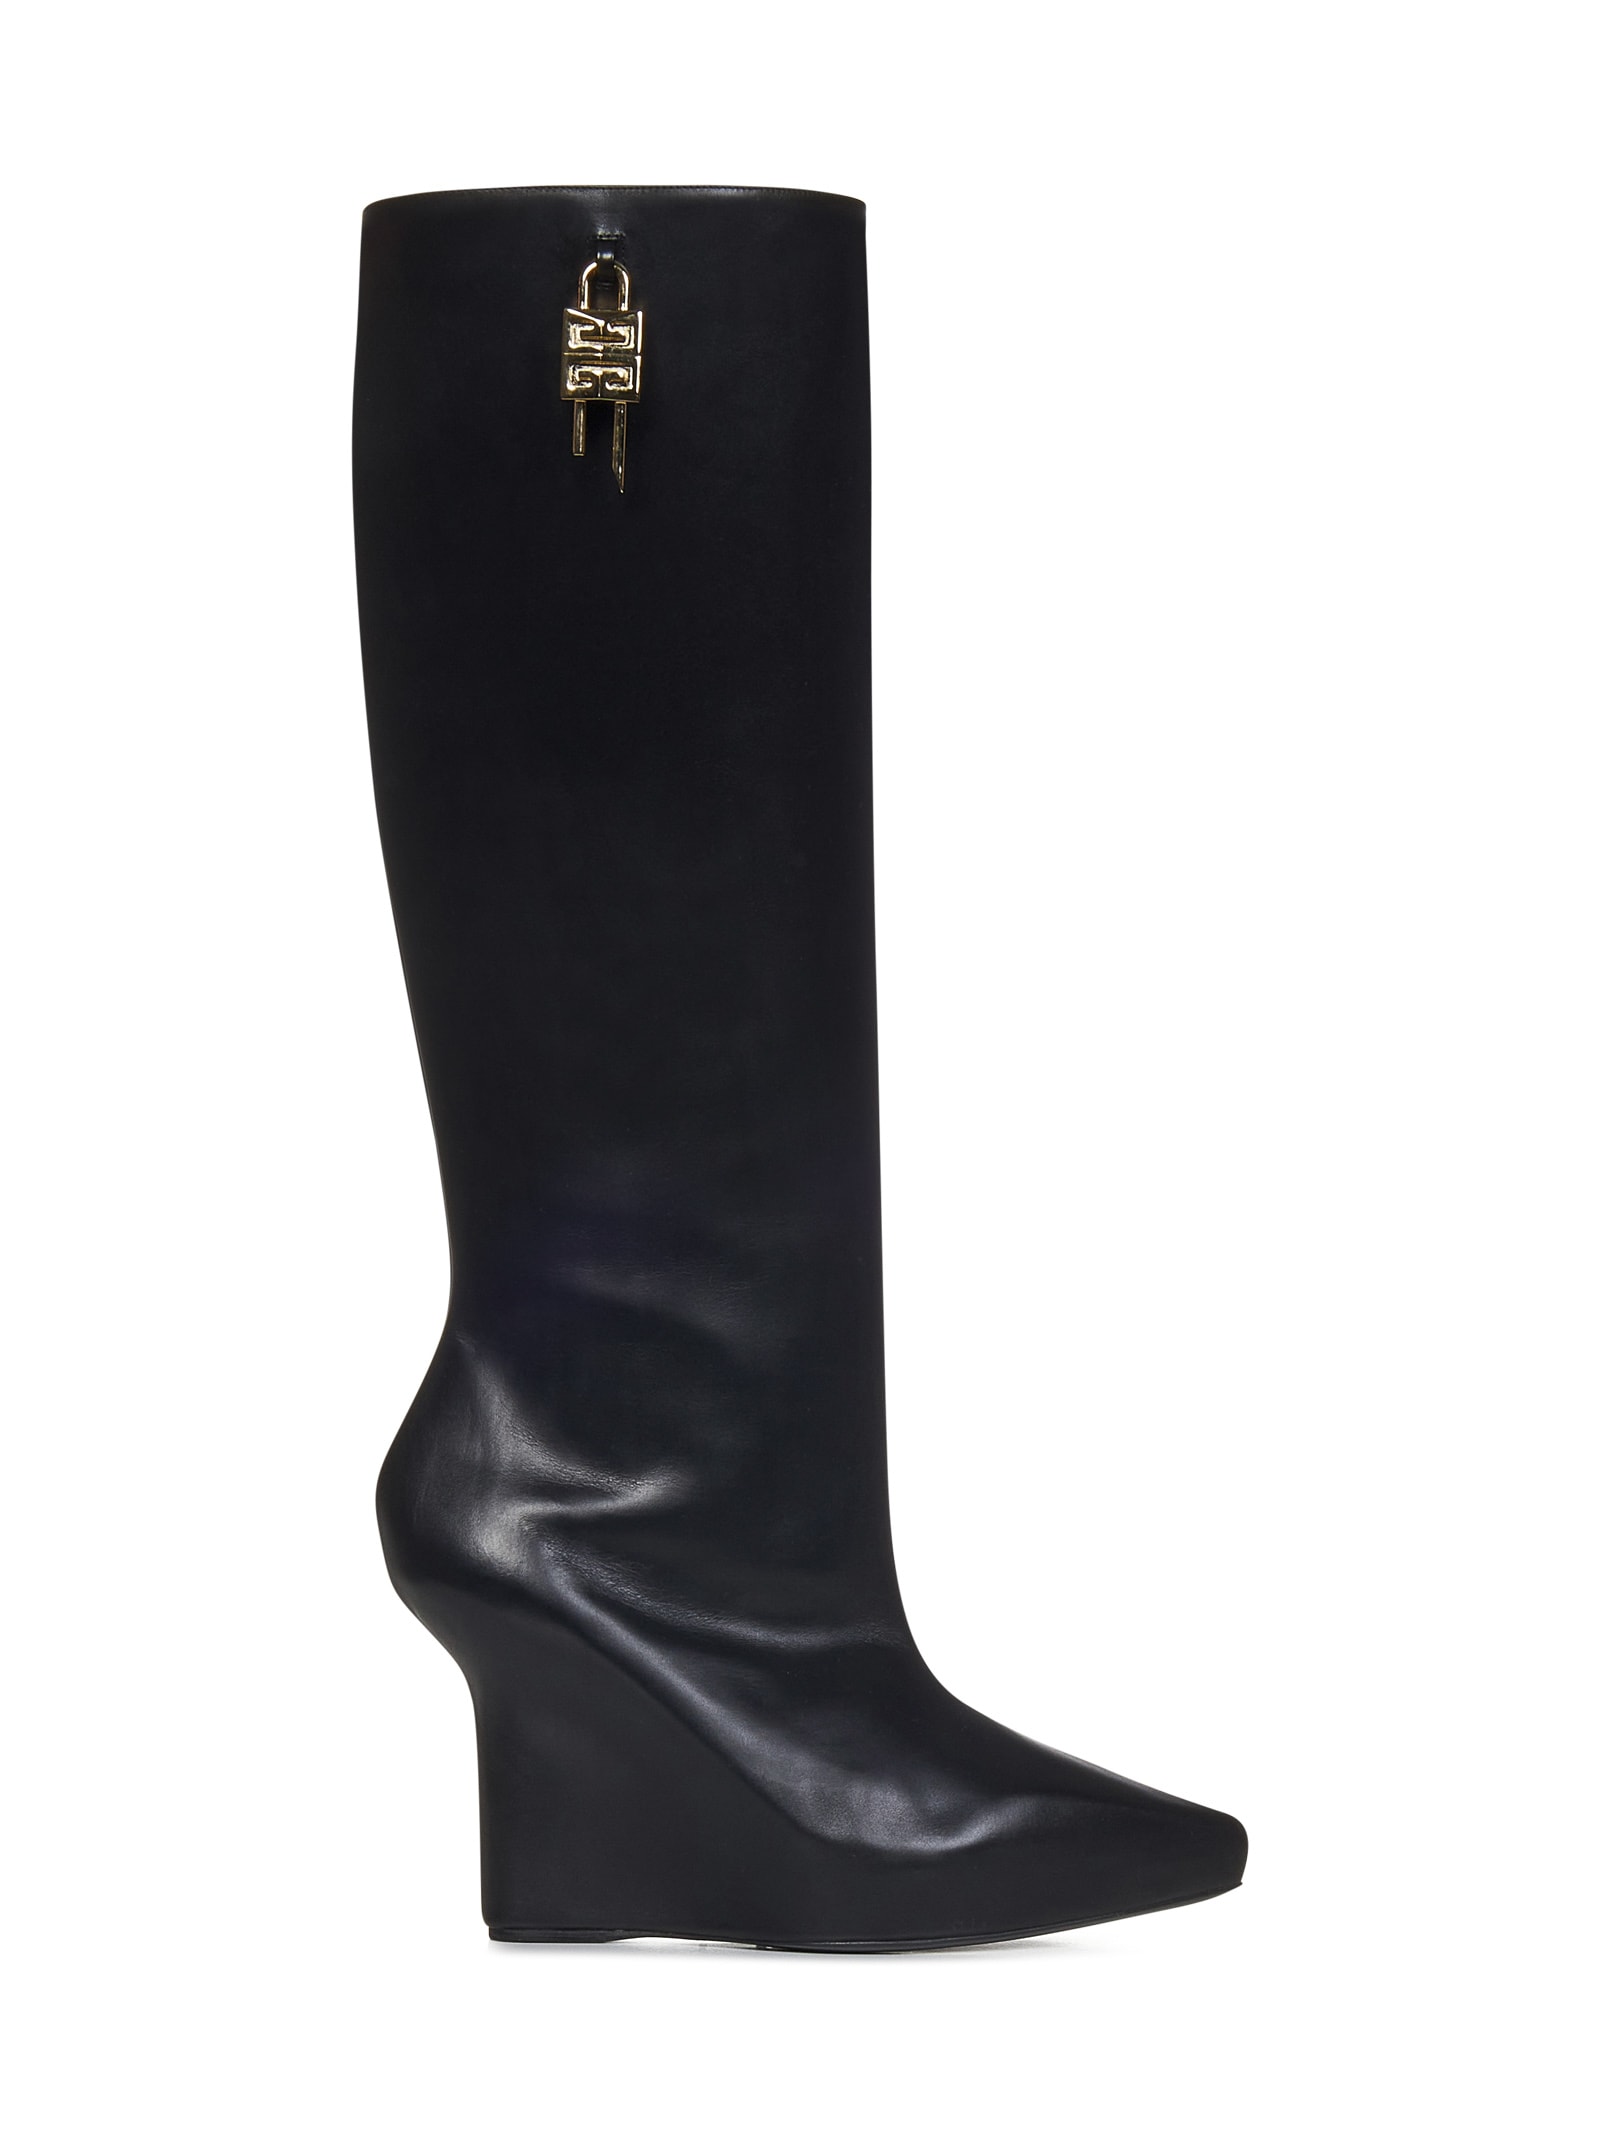 GIVENCHY G-LOCK BOOTS